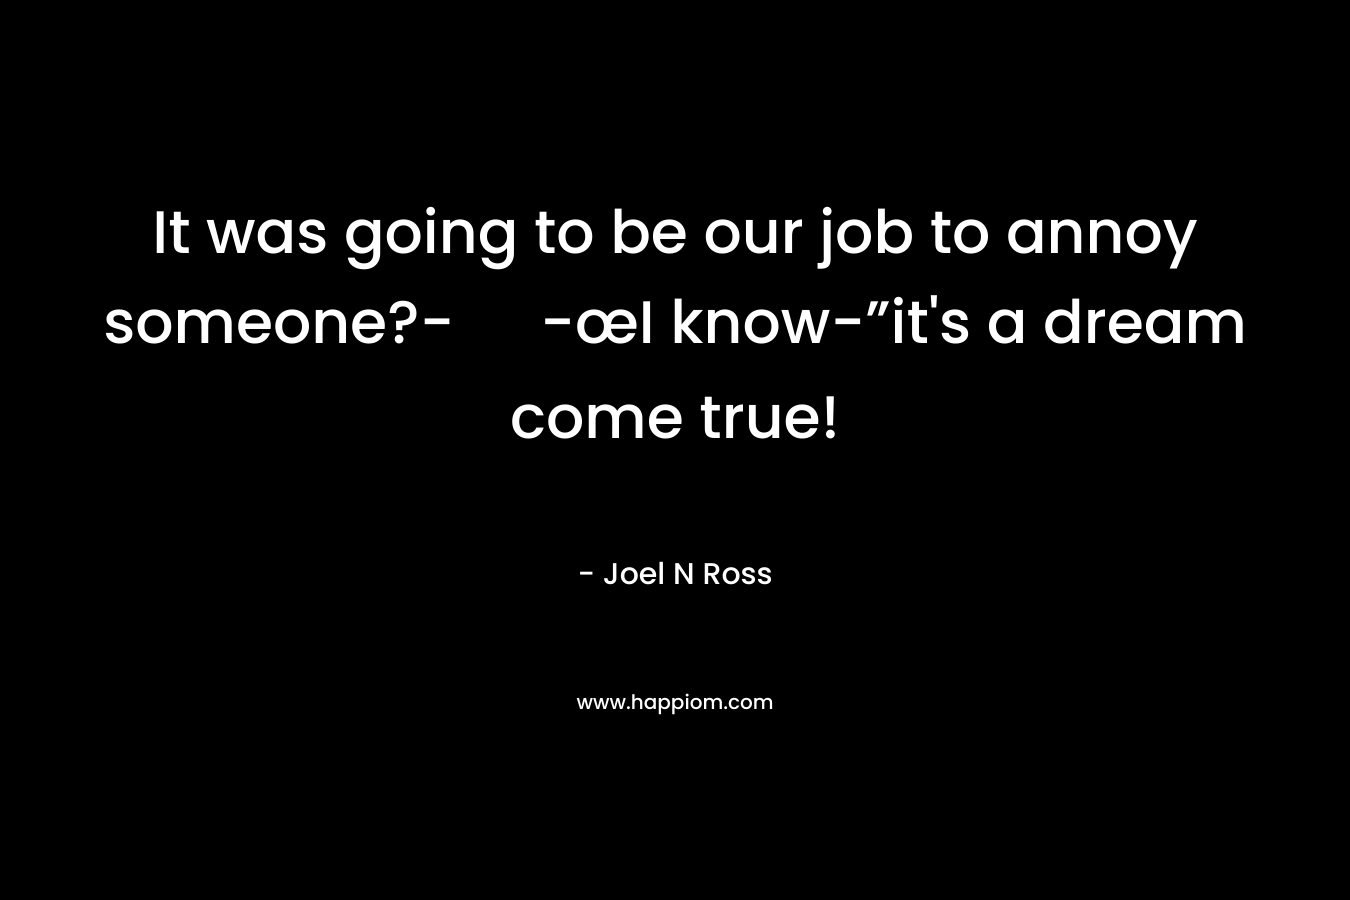 It was going to be our job to annoy someone?- -œI know-”it's a dream come true!